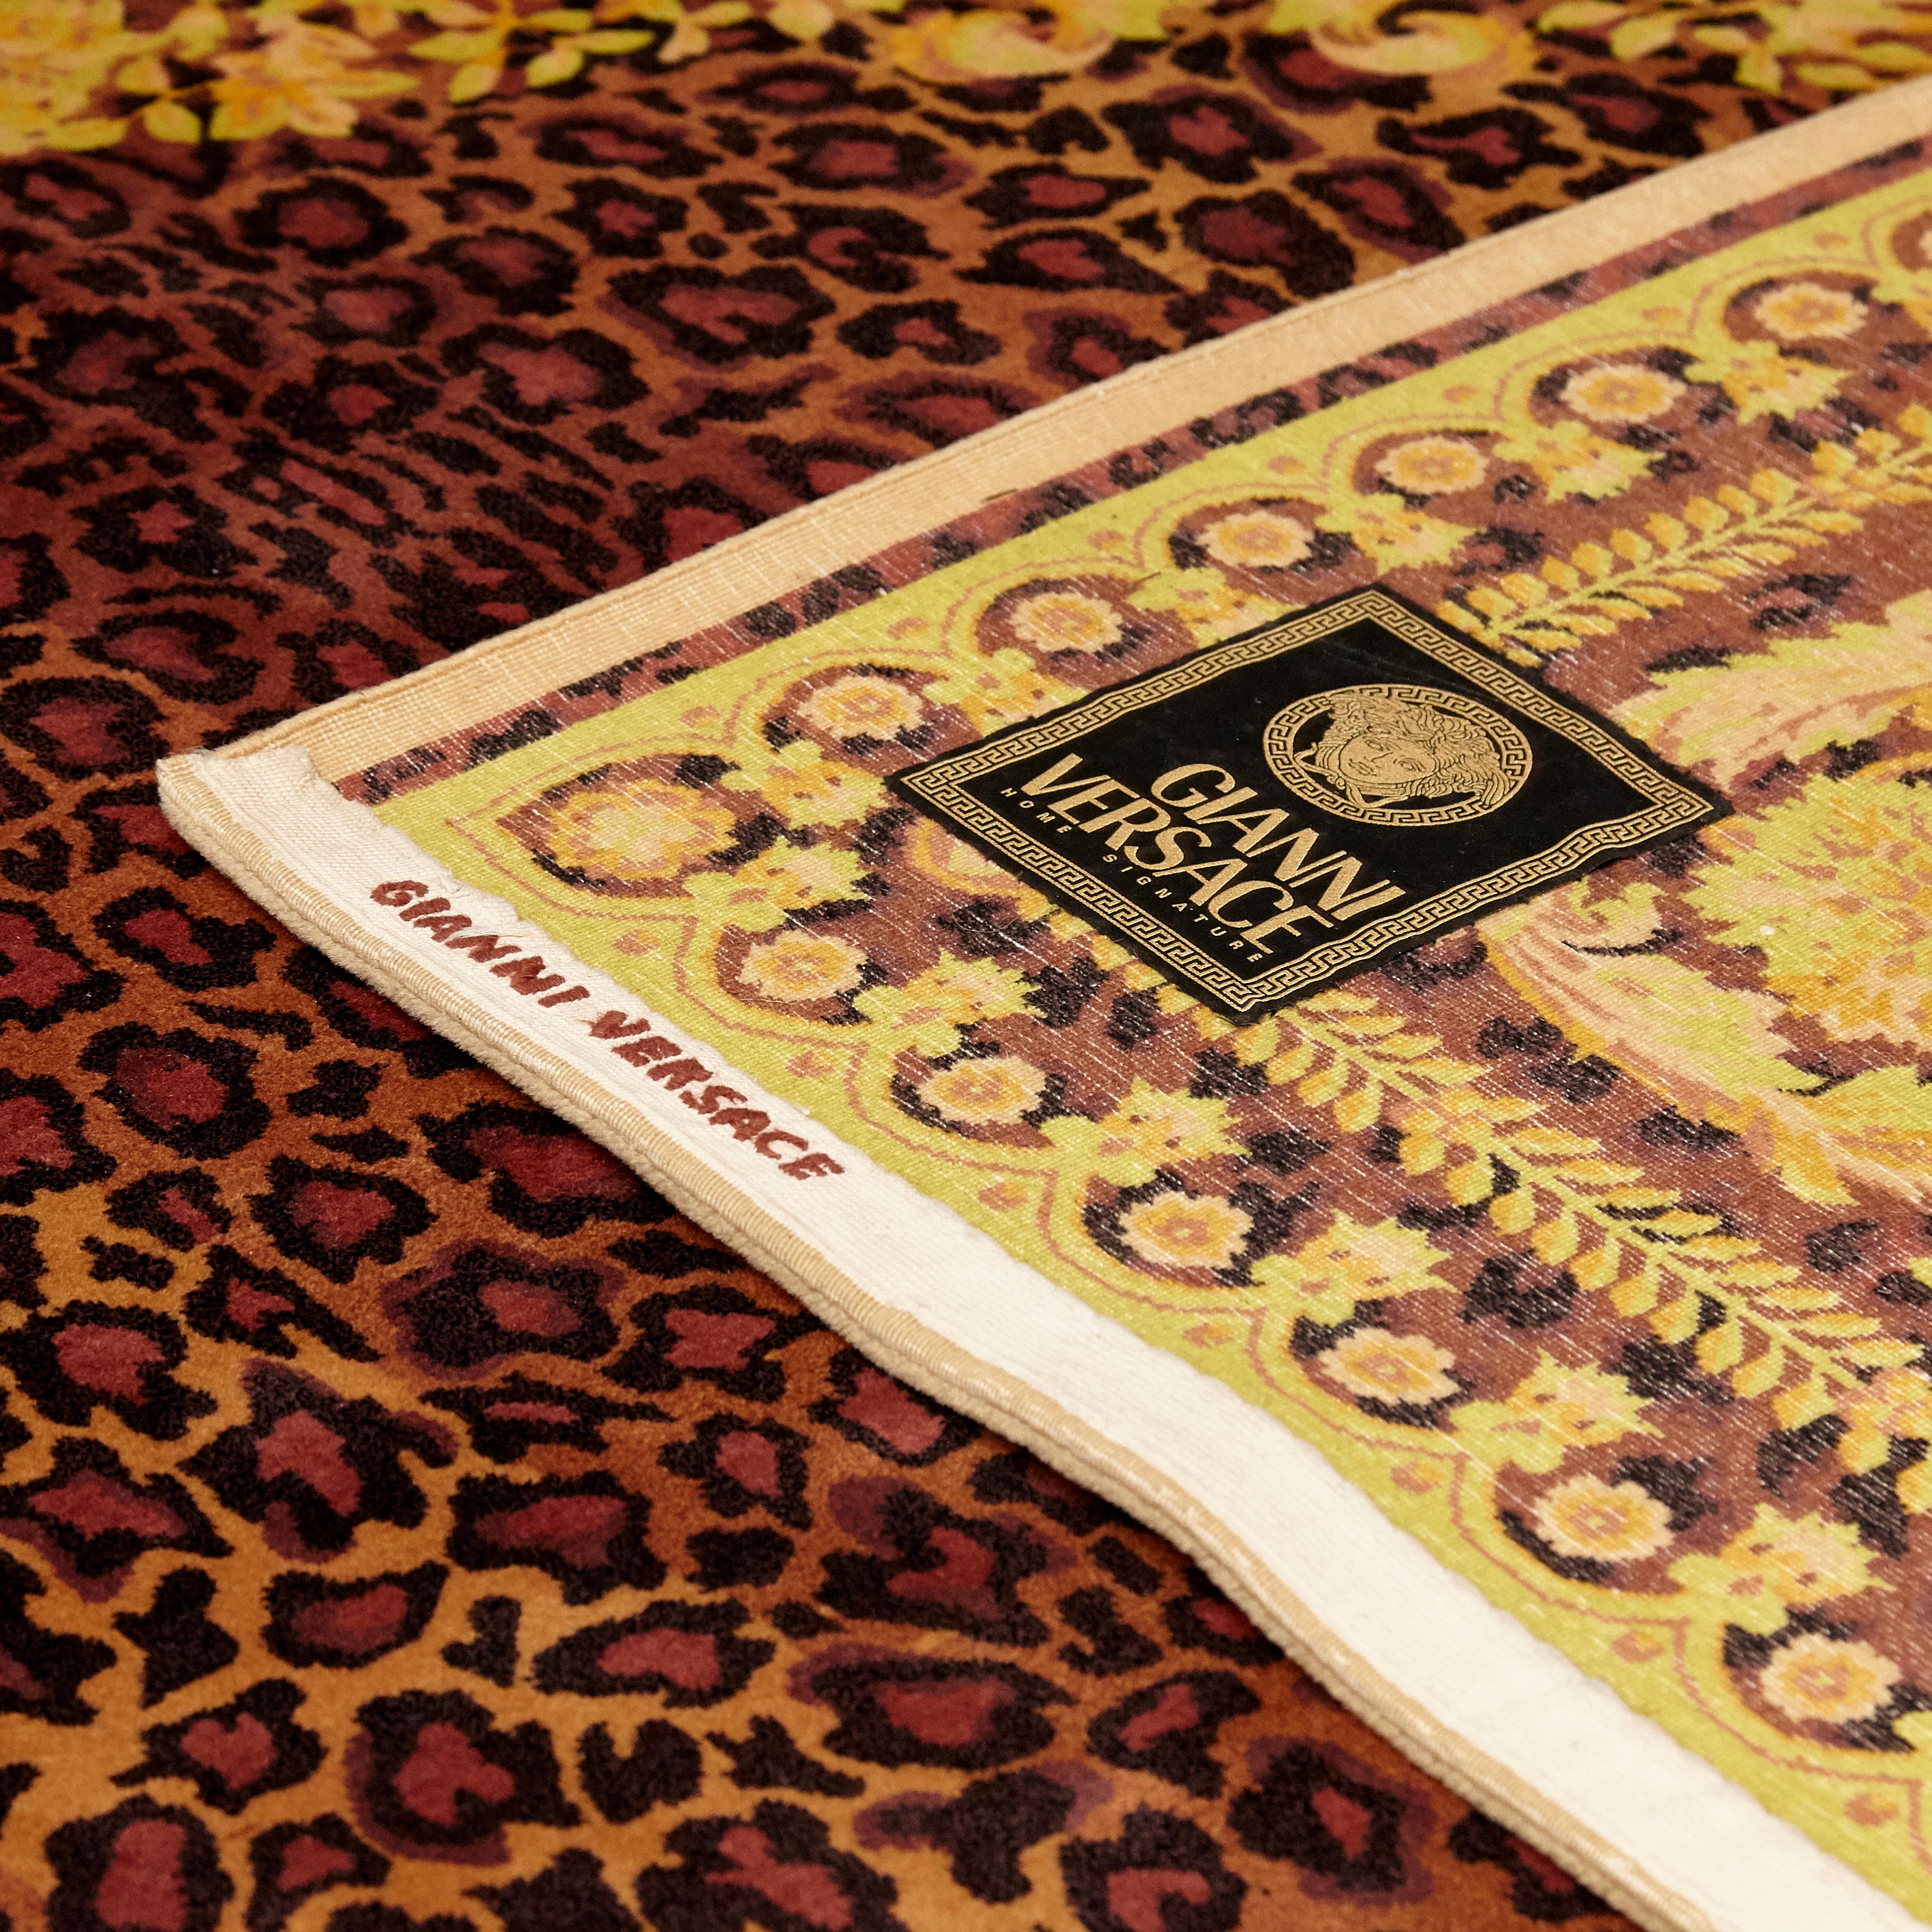 Gianni Versace Collection Rug Wild Barocco, Gold Leopard Animal Print, 1980 7